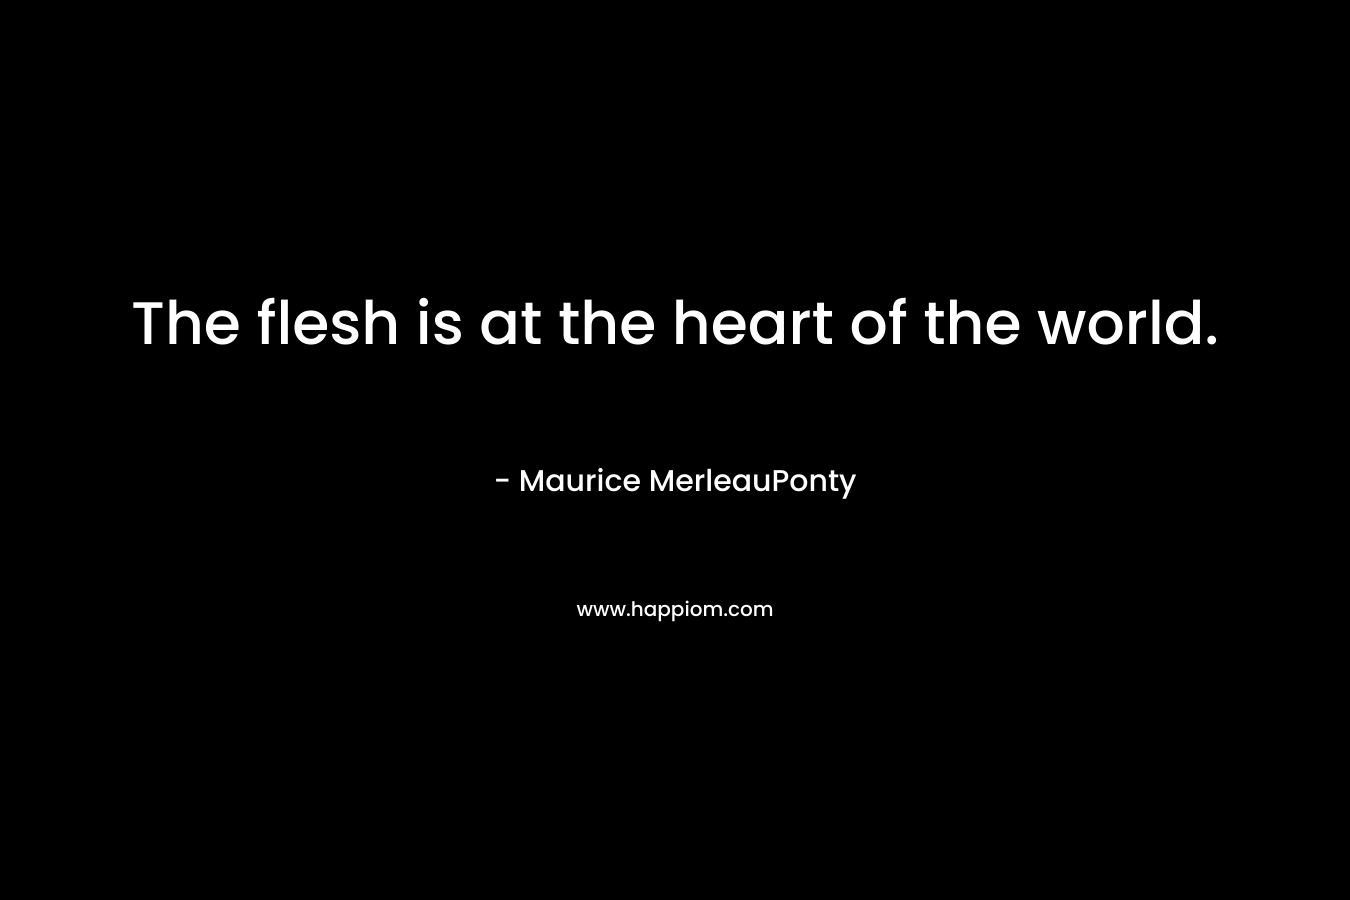 The flesh is at the heart of the world. – Maurice MerleauPonty